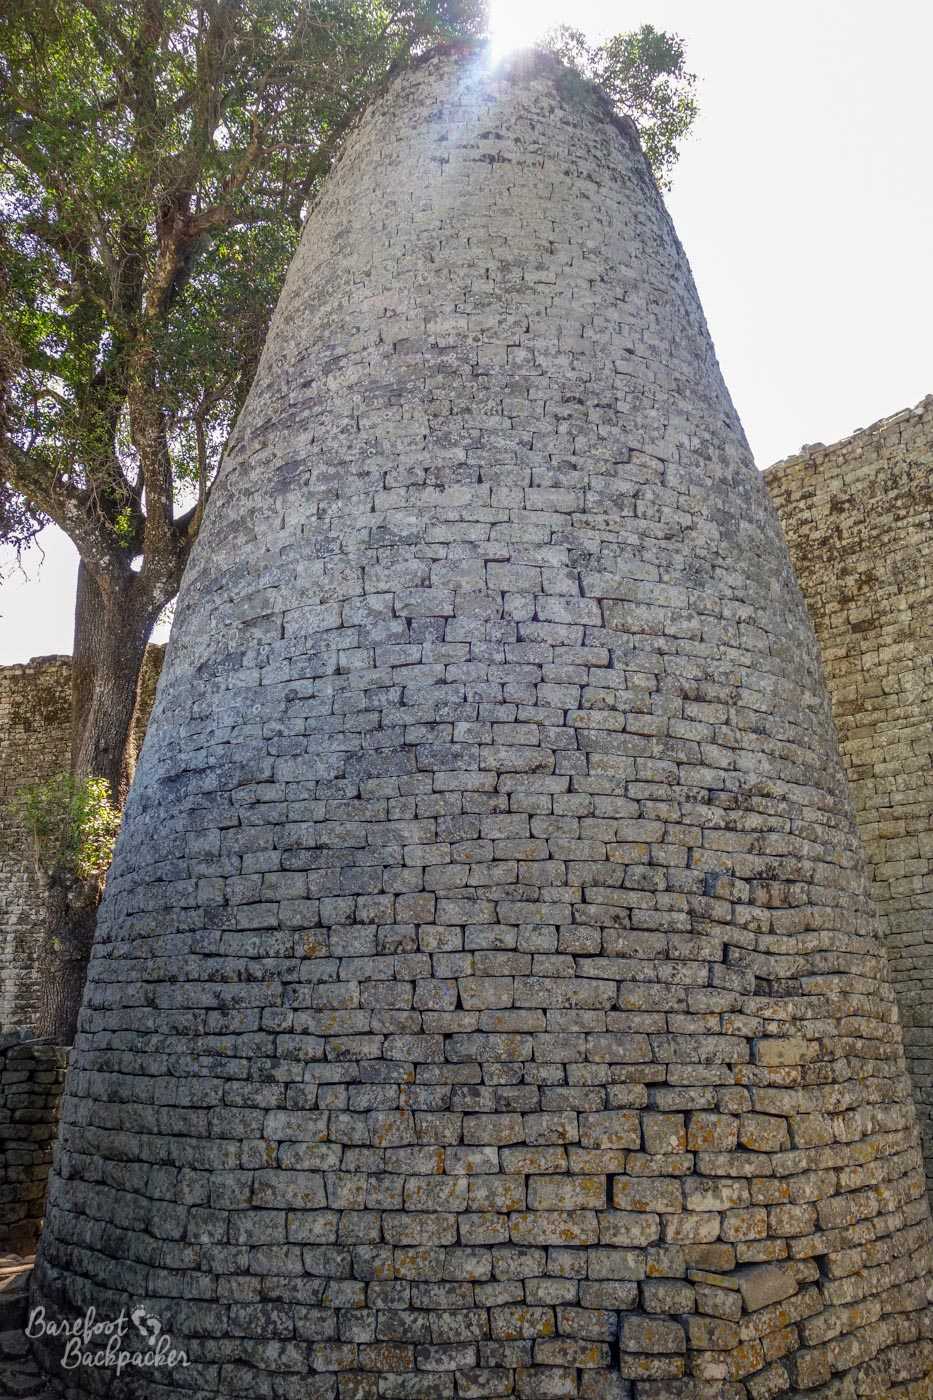 the iconic conical tower of Great Zimbabwe's Great Enclosure